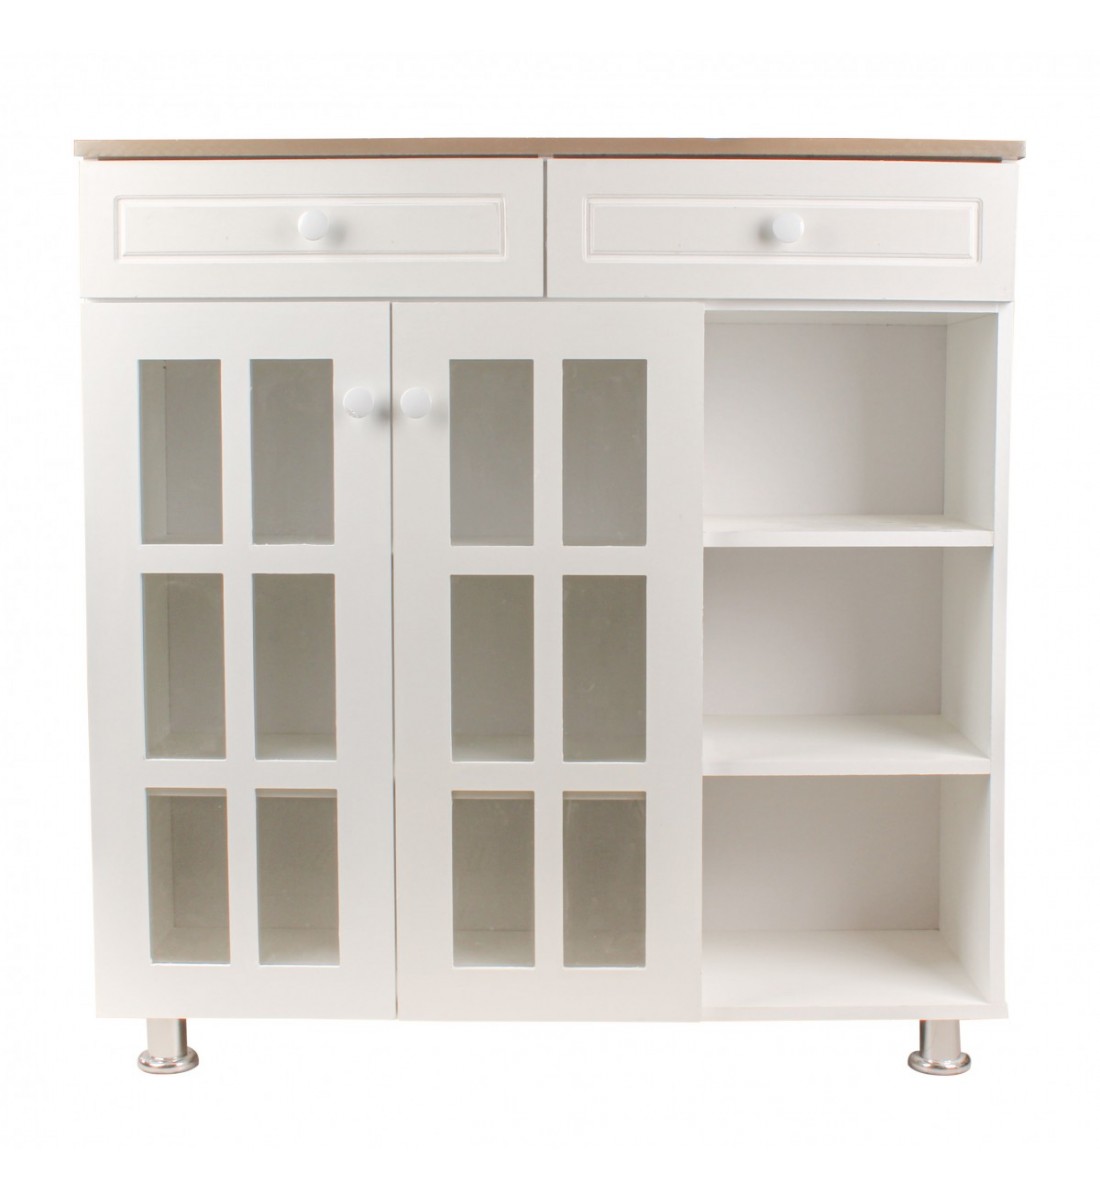 Cafe corner drawer 2 drawers and 2 white wooden doors size 100 * 33 * 103 cm